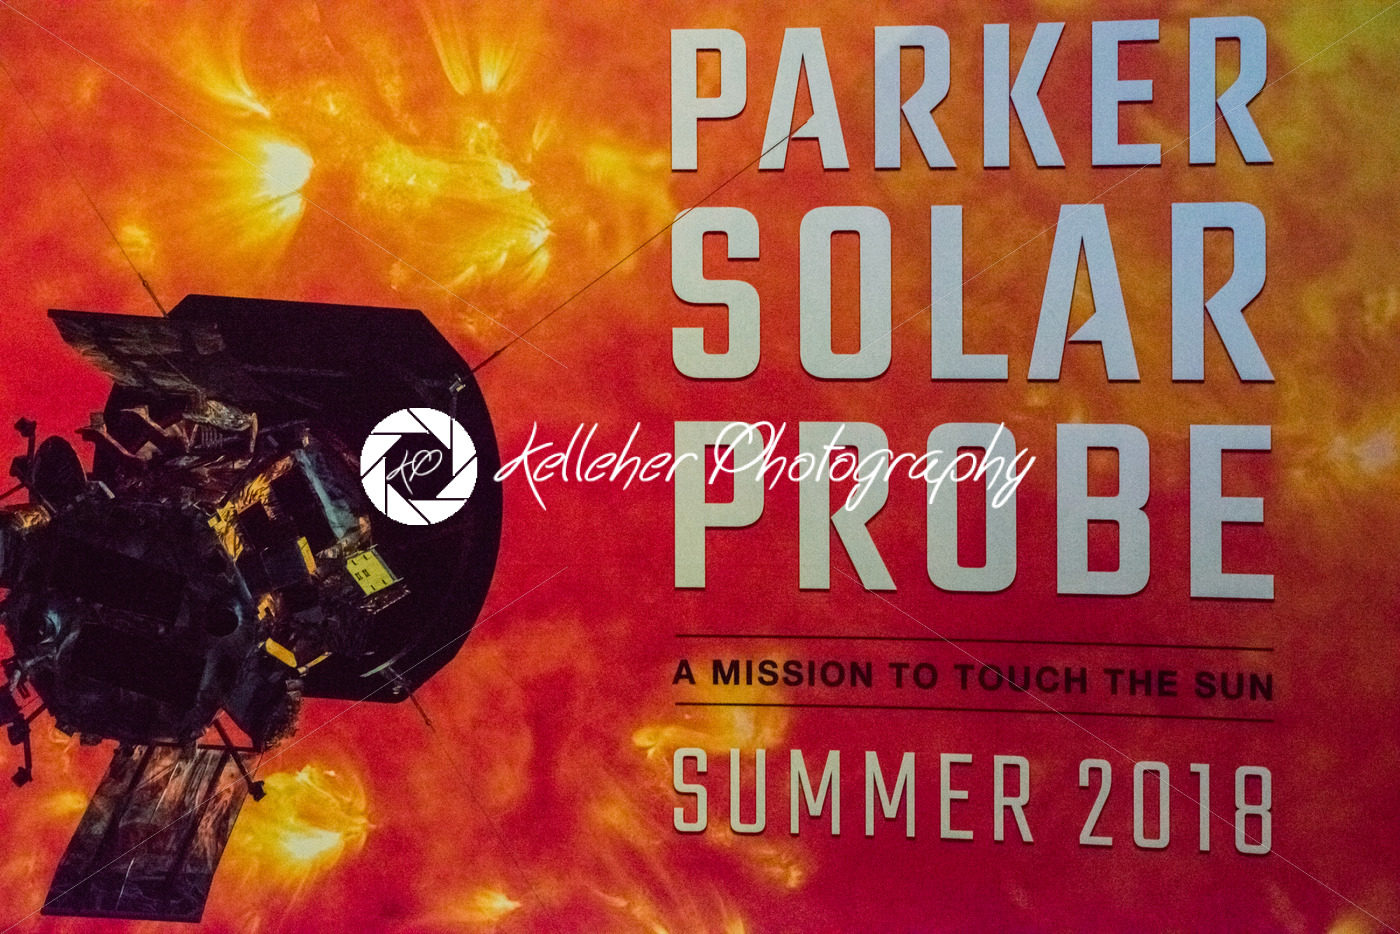 Cape Canaveral, Florida – August 13, 2018: Sign for Parker Solar Probe at NASA Kennedy Space Center - Kelleher Photography Store